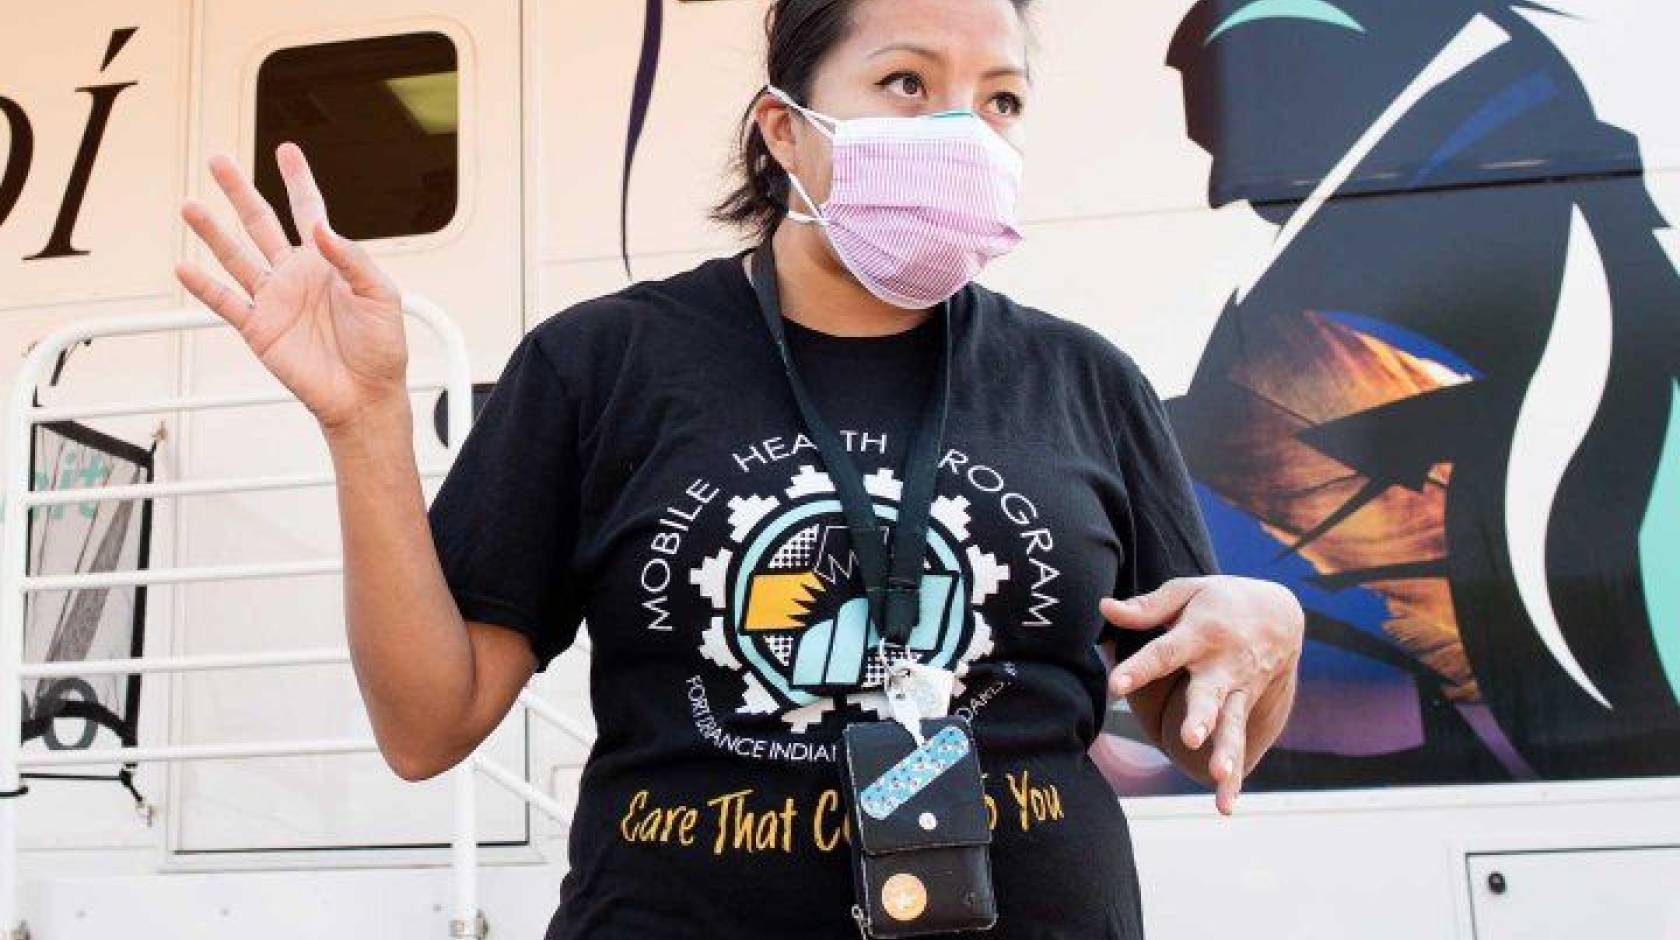 A young woman wearing a black t-shirt and a pink face mask gesticulates with her hands standing in front of a trailer